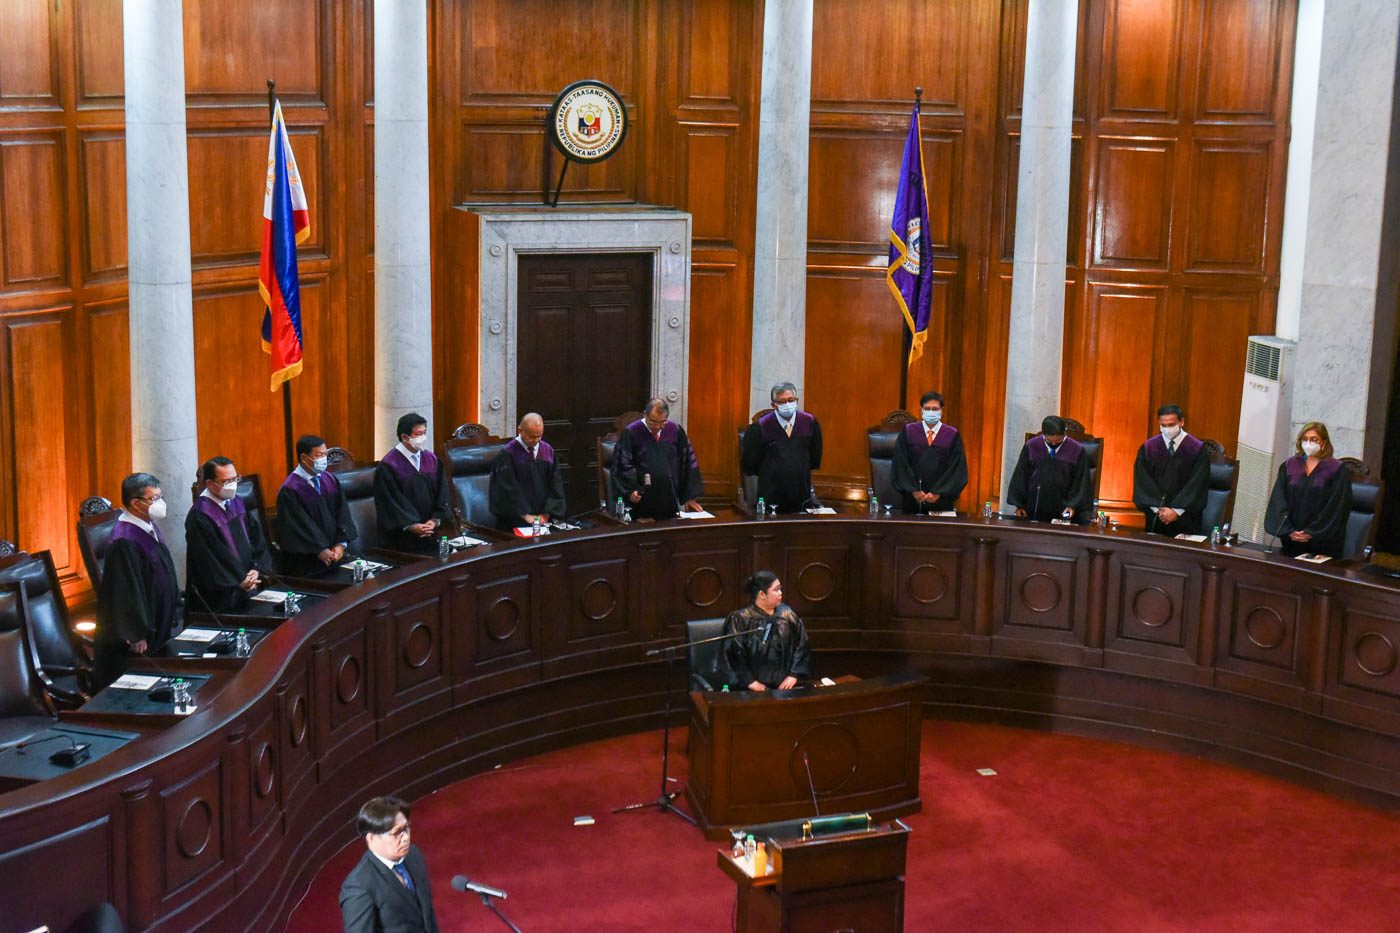 IN NUMBERS: Things to know about the Philippine Supreme Court and its justices